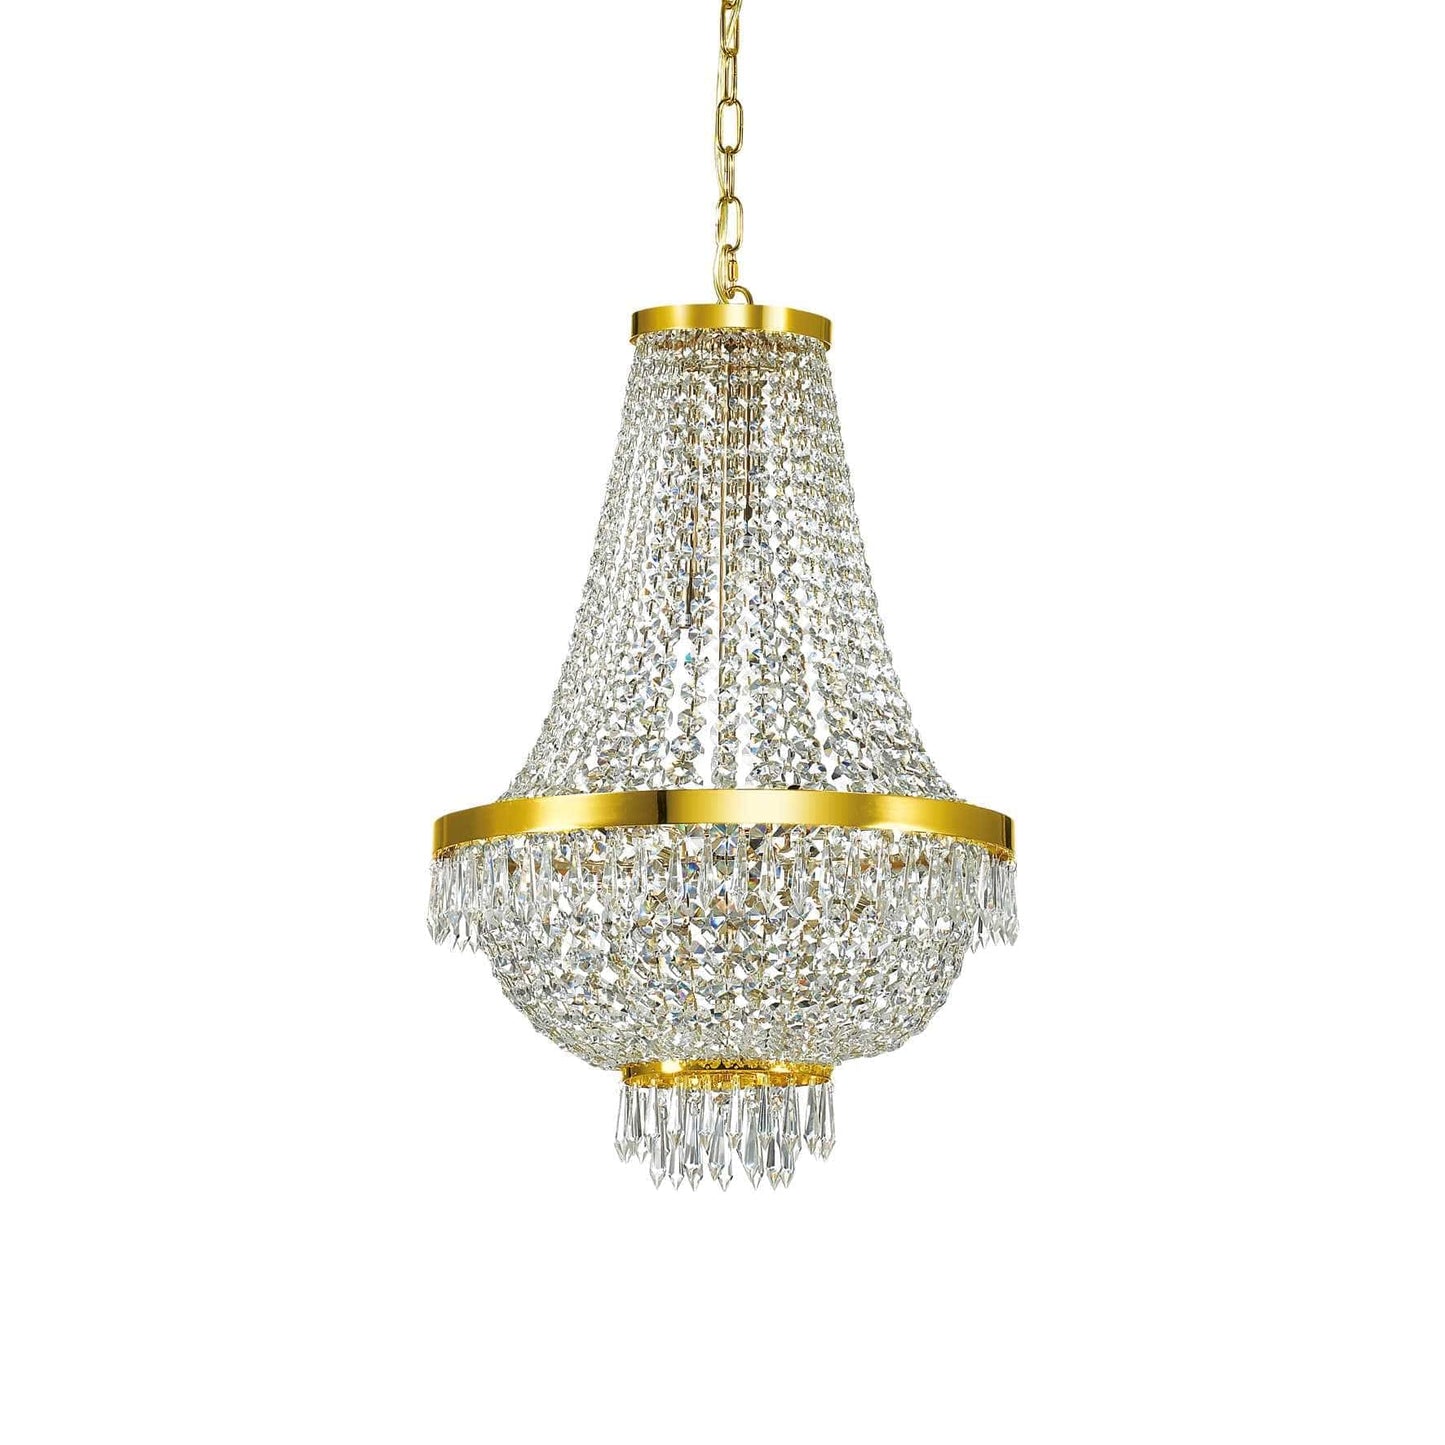 Ideal Lux Lighting Chandeliers Gold Caesar SP9 Crystal Chandelier, gold or chrome